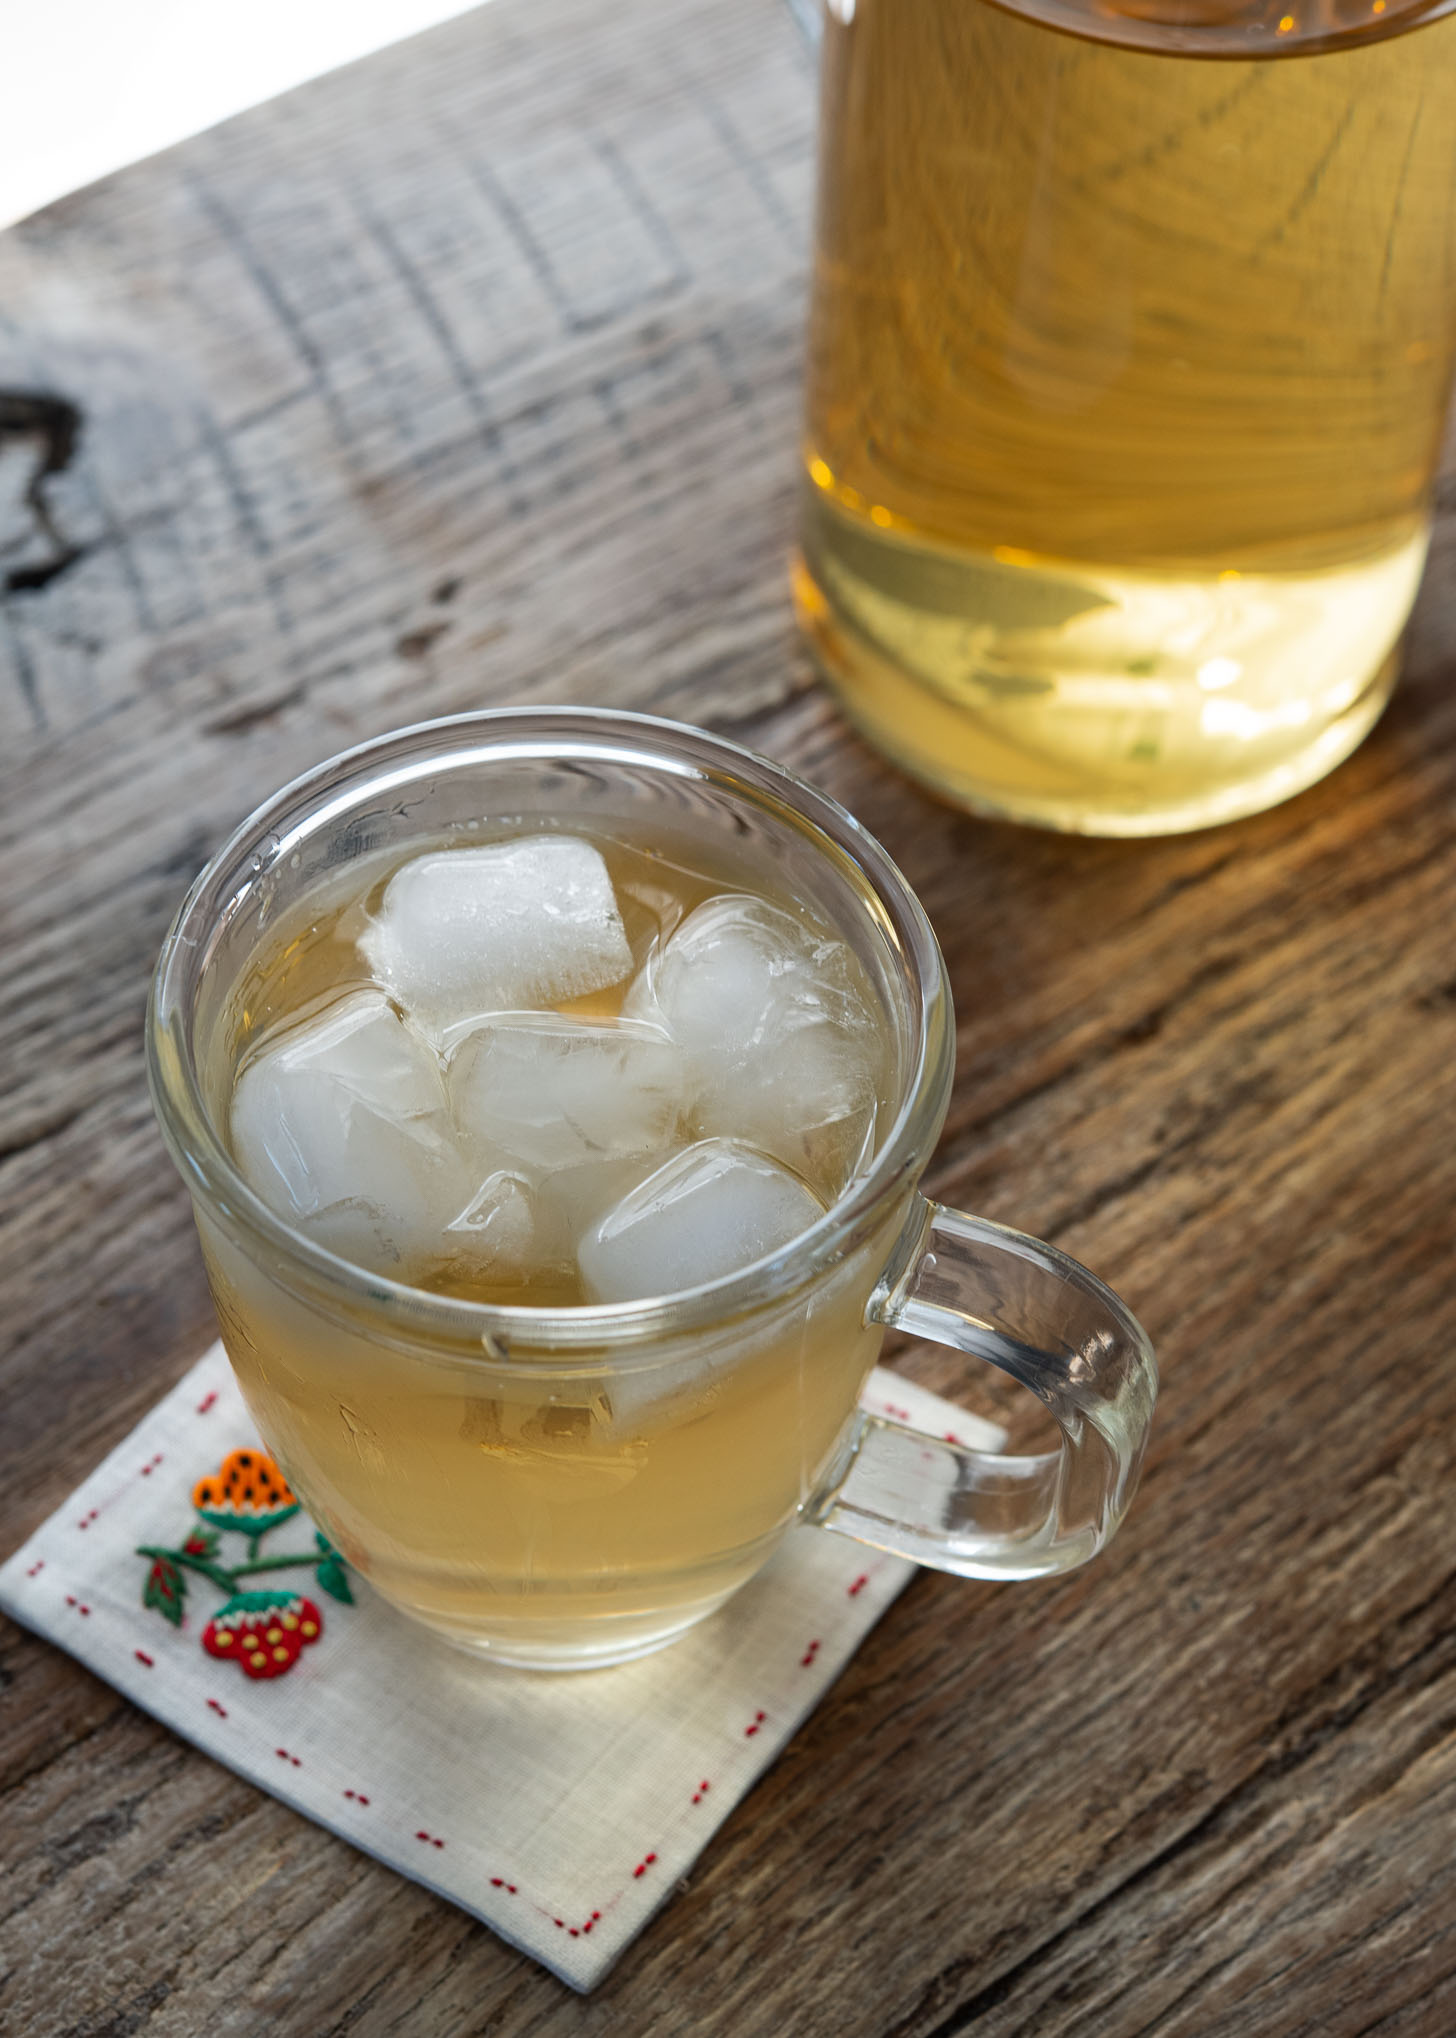 Cold Korean barley tea is garnished with ice cubes in a cup.